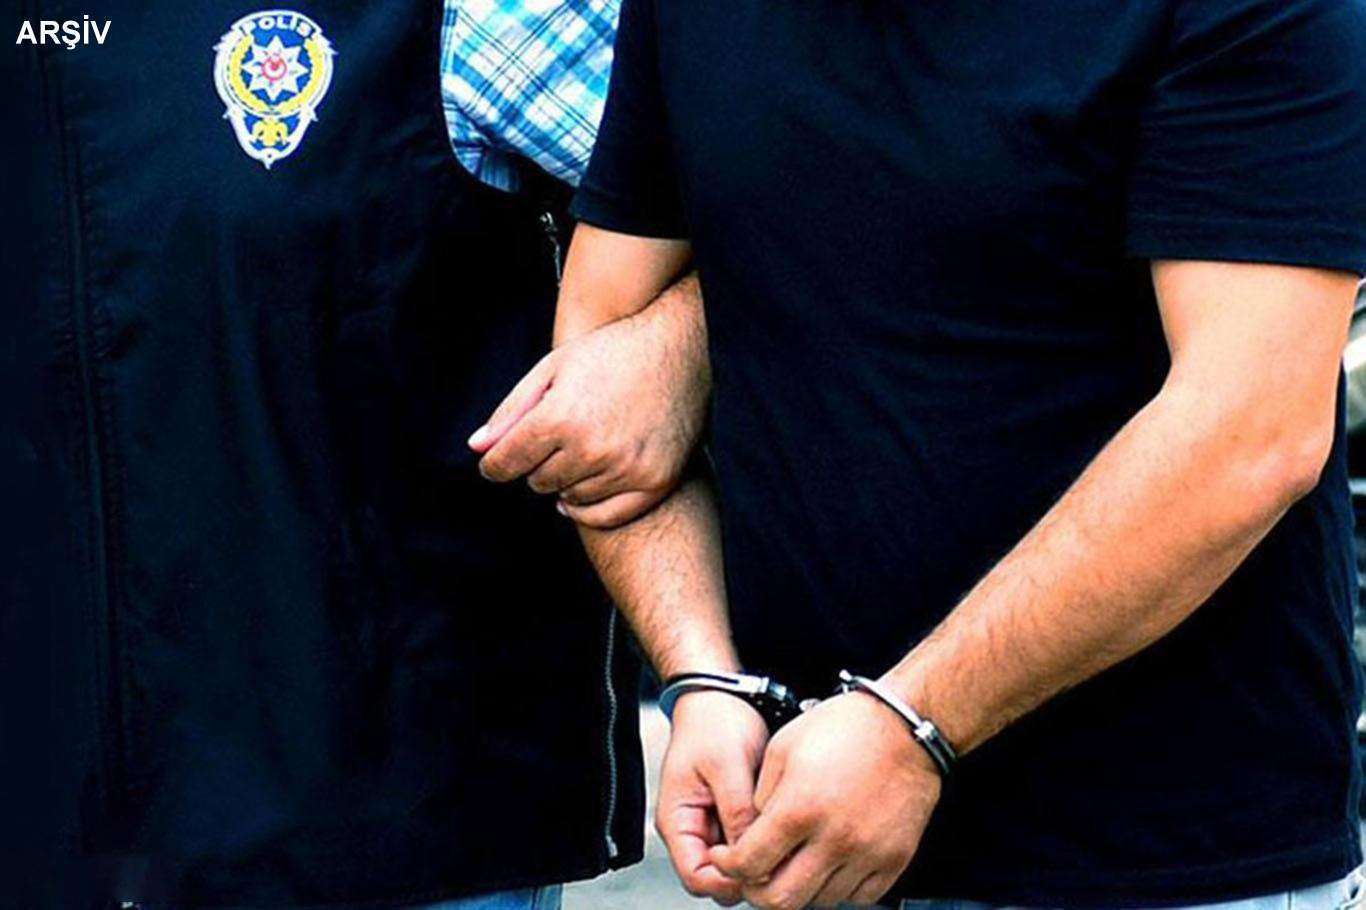 Turkey issues arrest warrants for 61 ISIL-linked suspects in Ankara-based operation